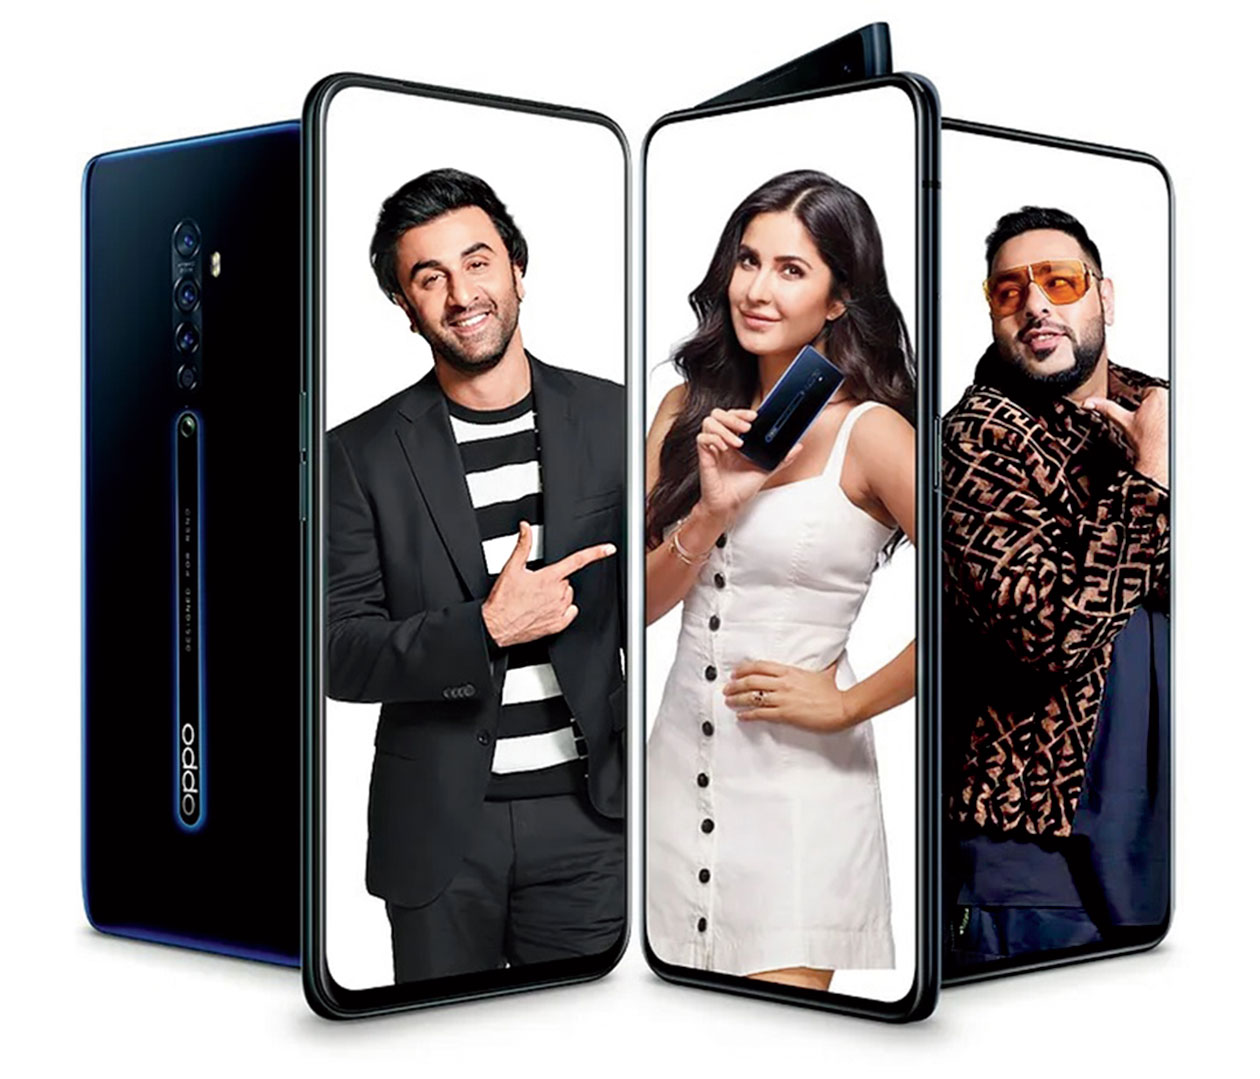 OPPO Reno 2 has been a big success for the Chinese smartphone maker in 2019. 